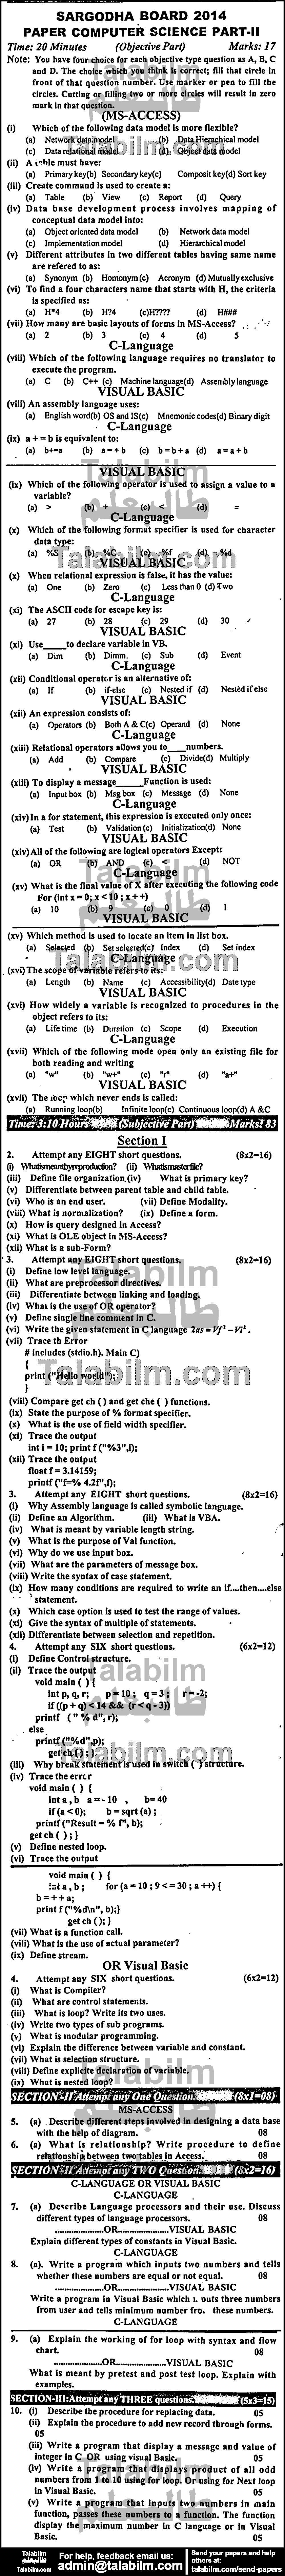 Computer Science 0 past paper for Group-I 2014